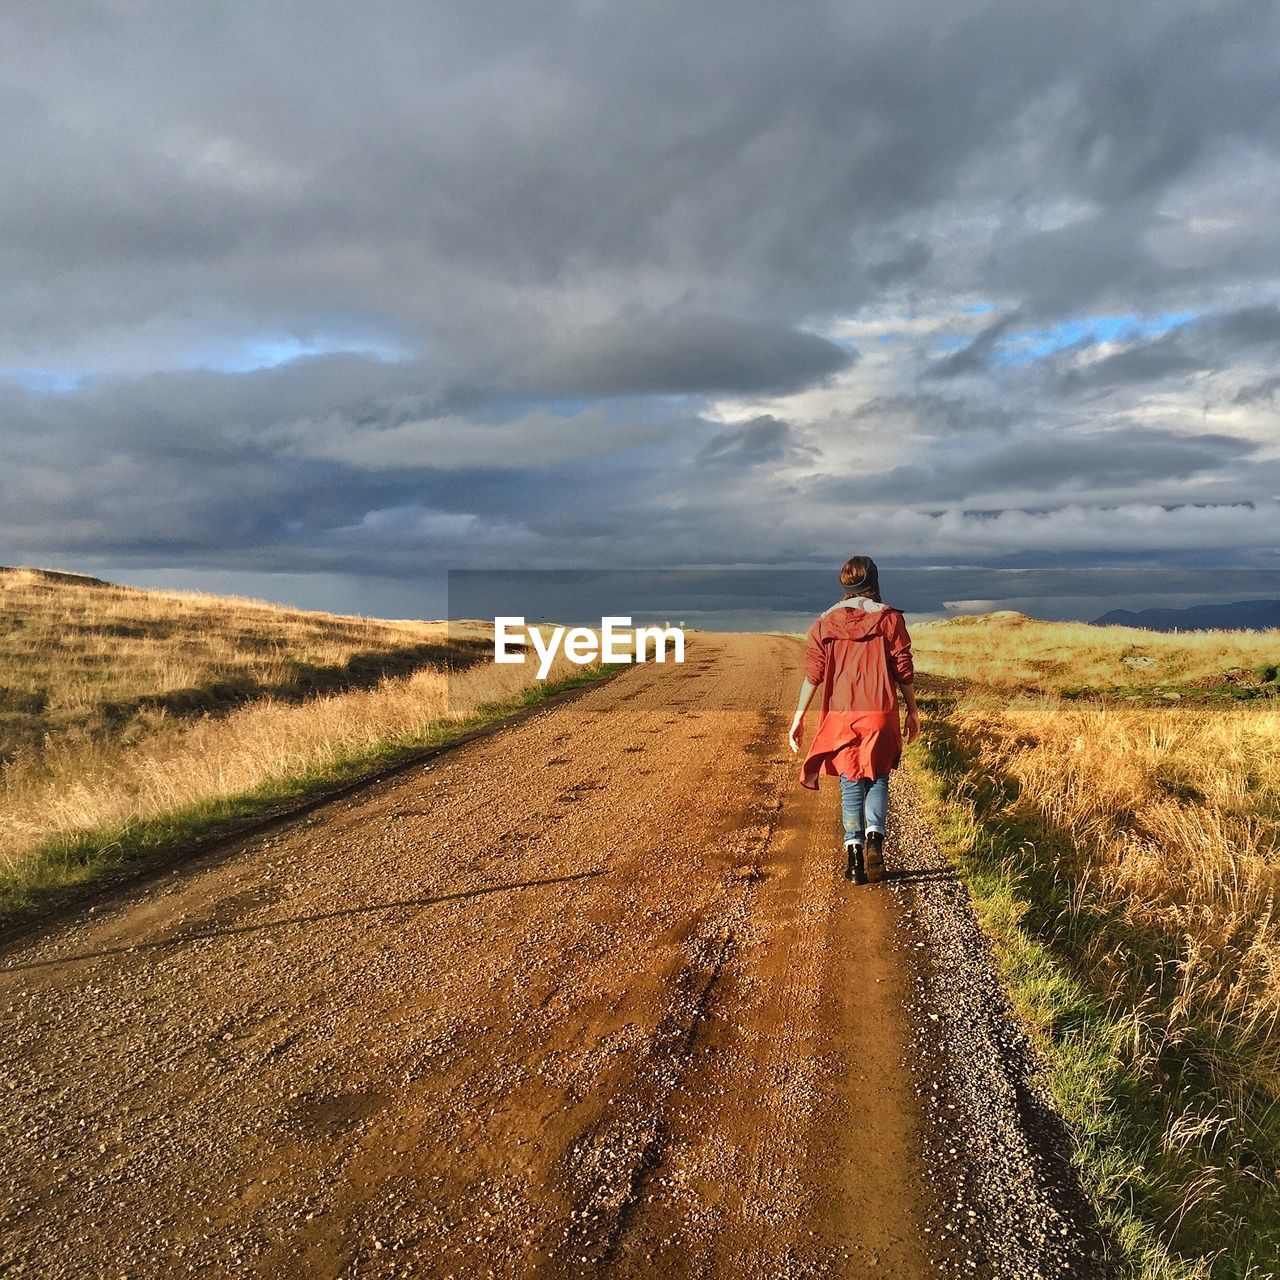 Rear view of young woman walking along dirt road in green field against cloudy sky